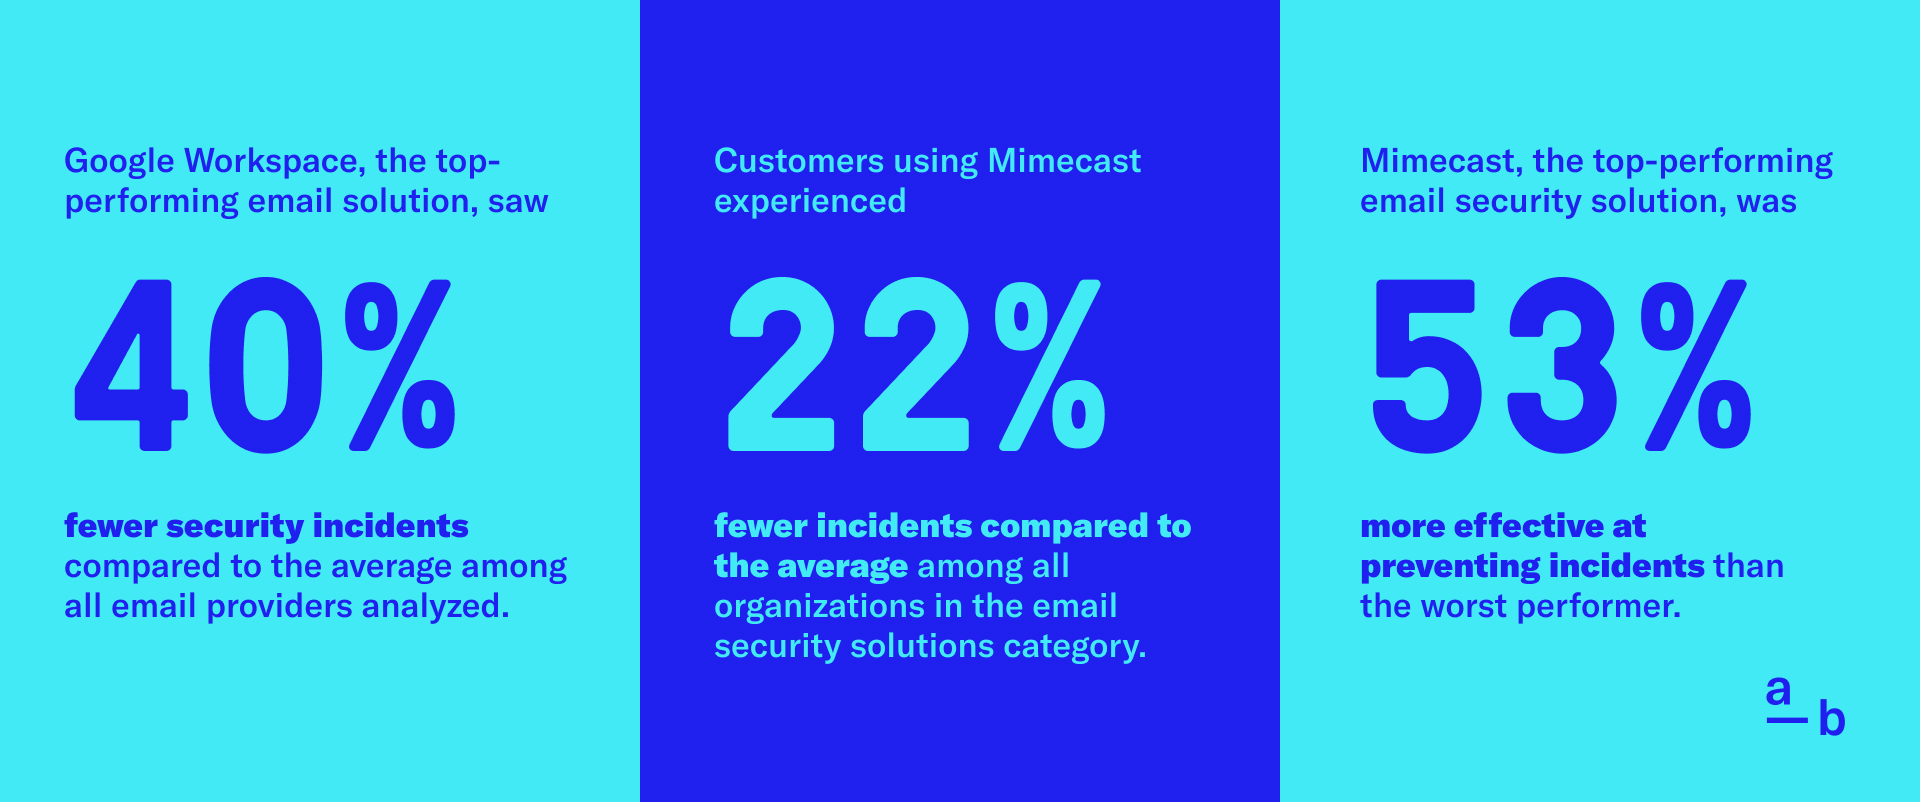 Email security statistics and research report